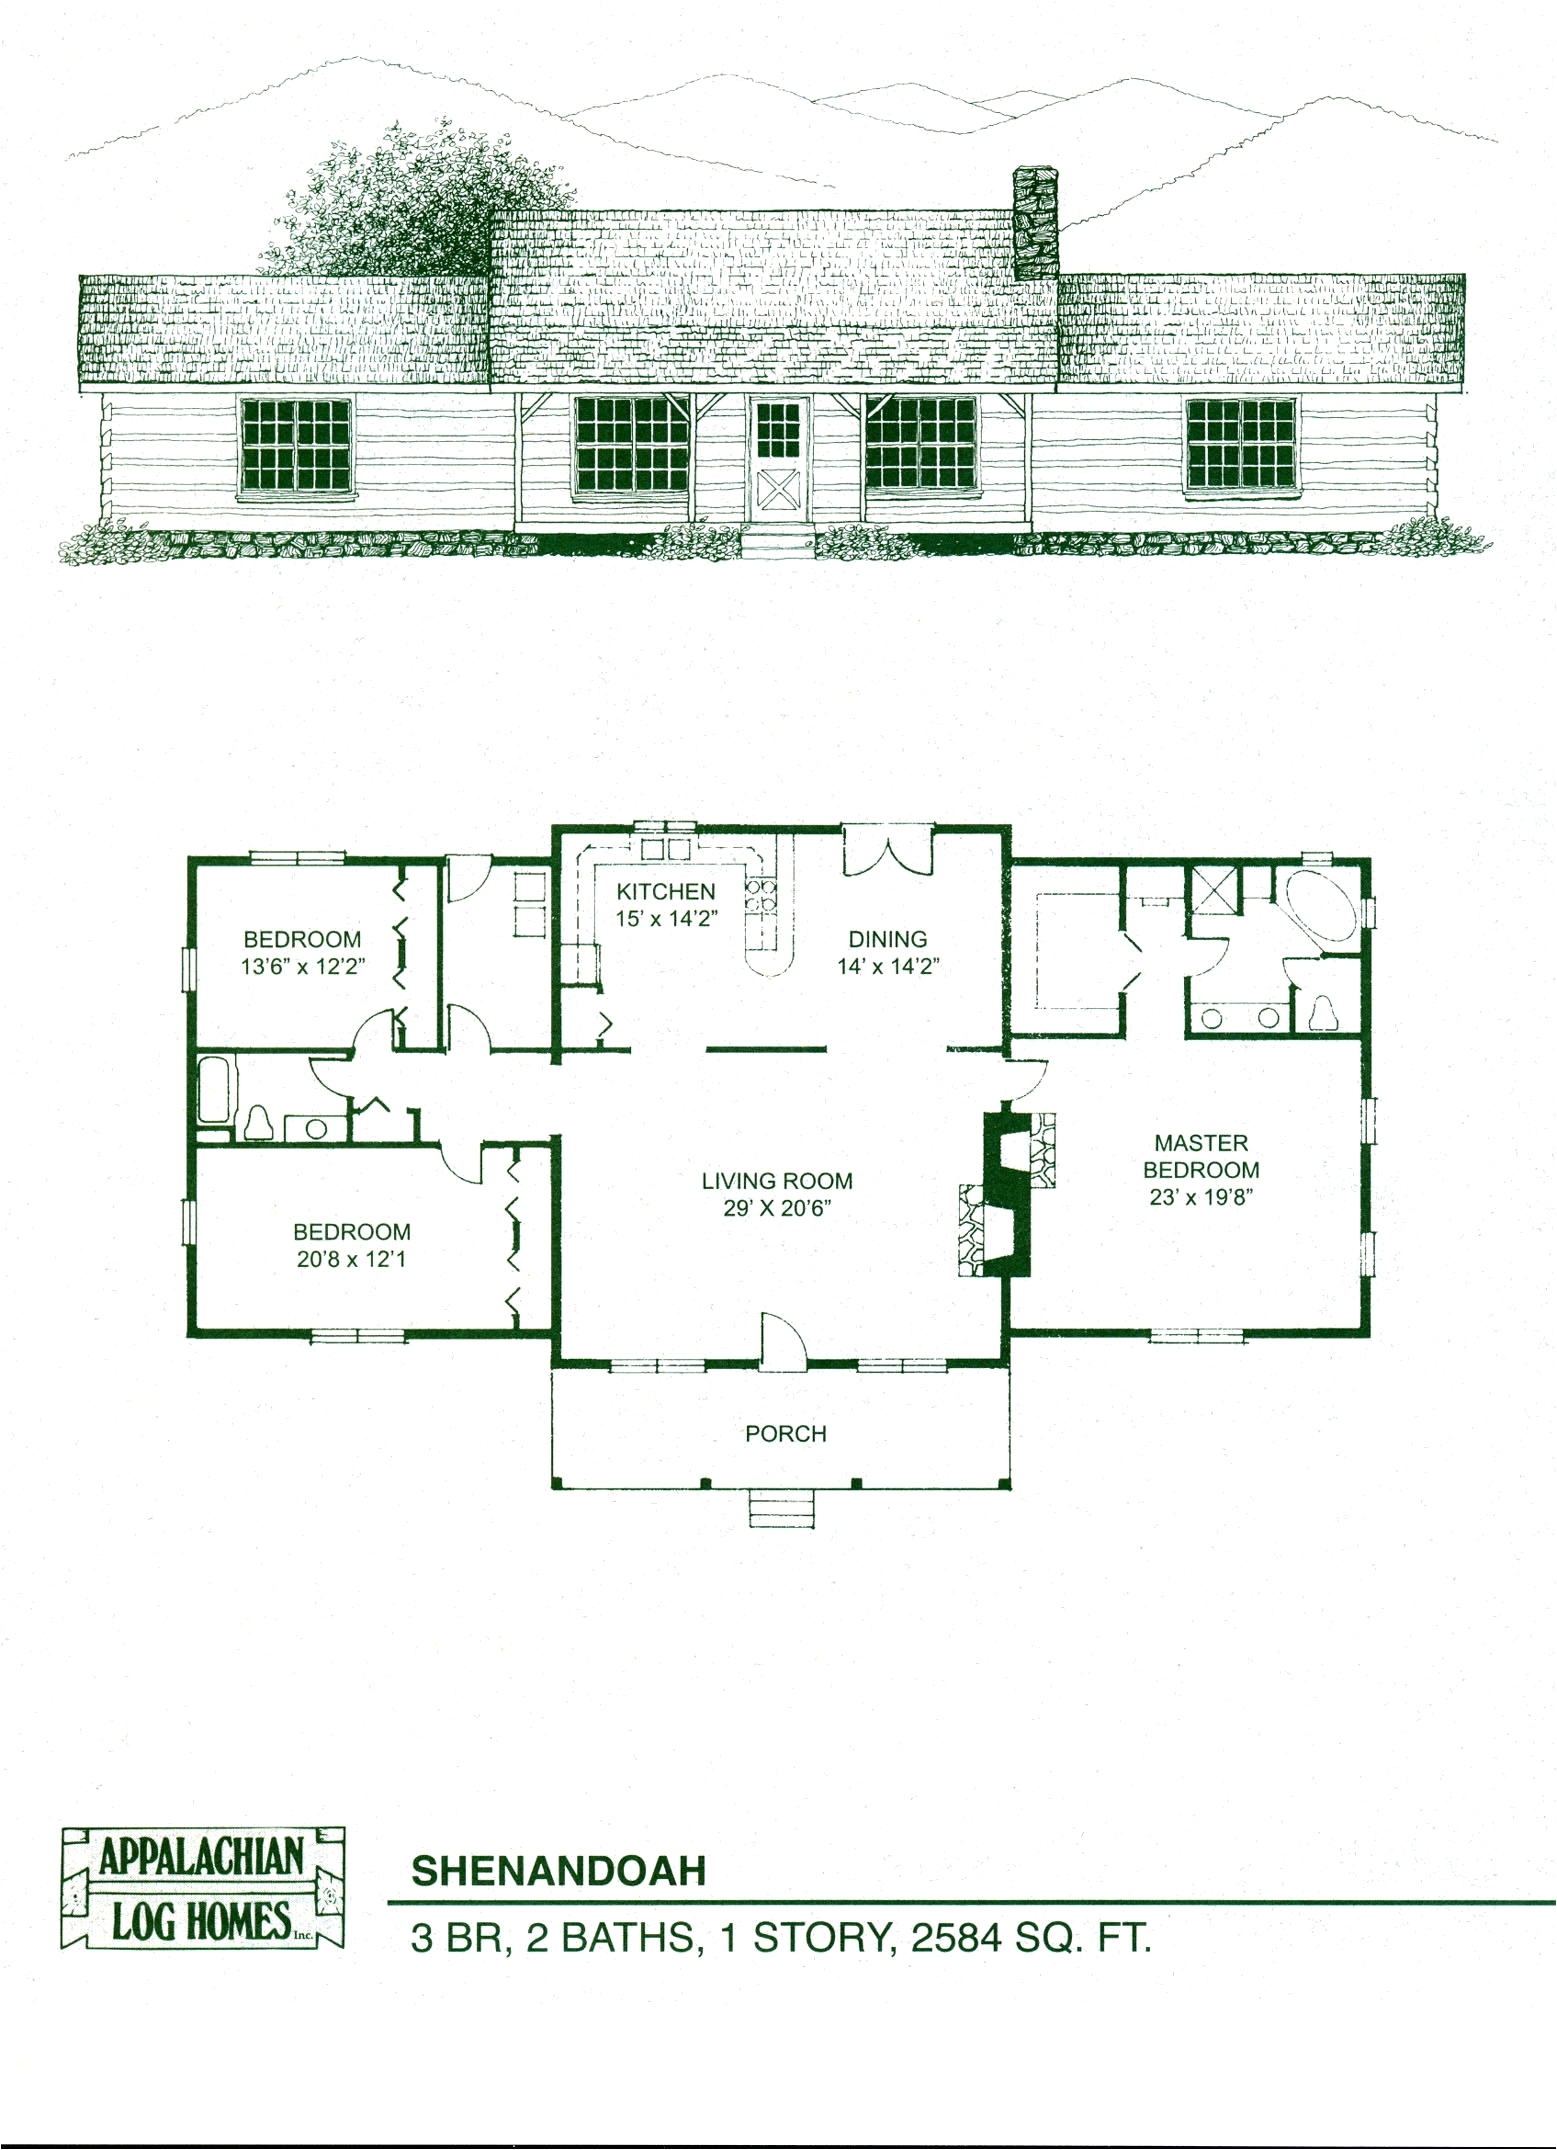 0d 27 is affordable luxury house plans small two story house plans two story country cabin 24x36 with